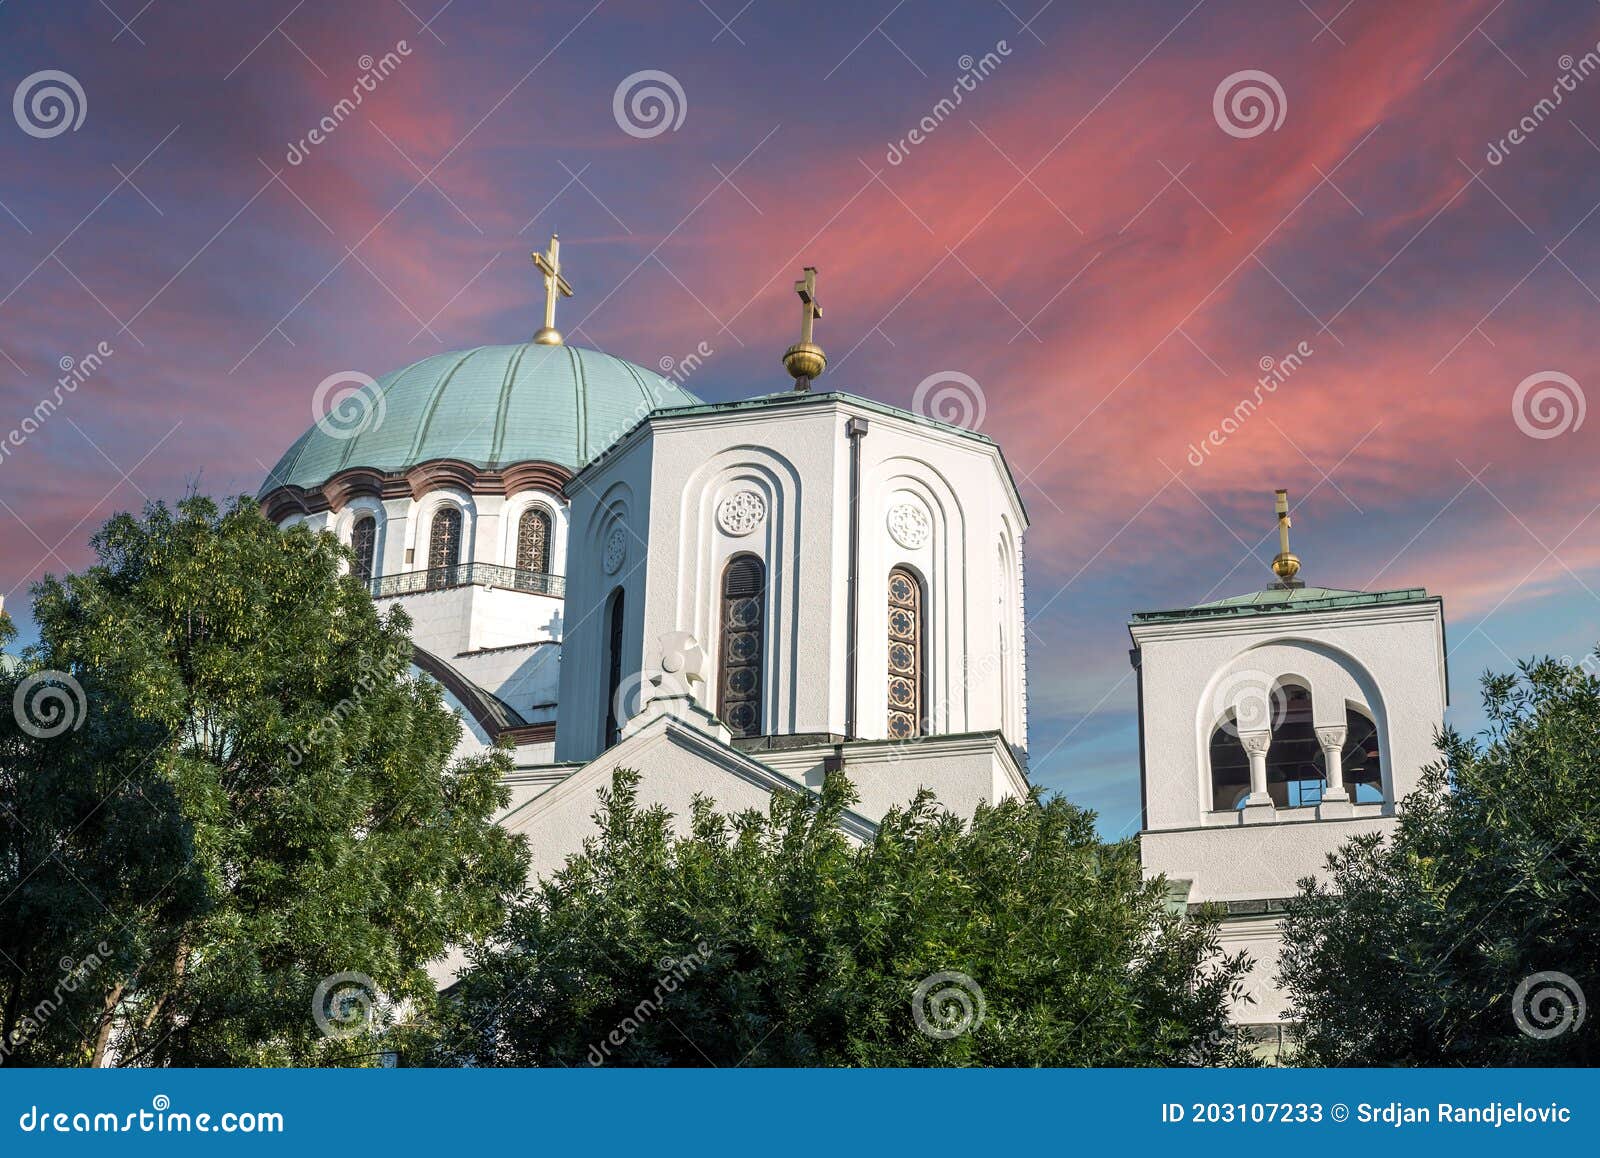 belgrade, serbia. june 28. 2020. view of bell towers of st. sava temple of serbian orthodox church on slavia square in serbian